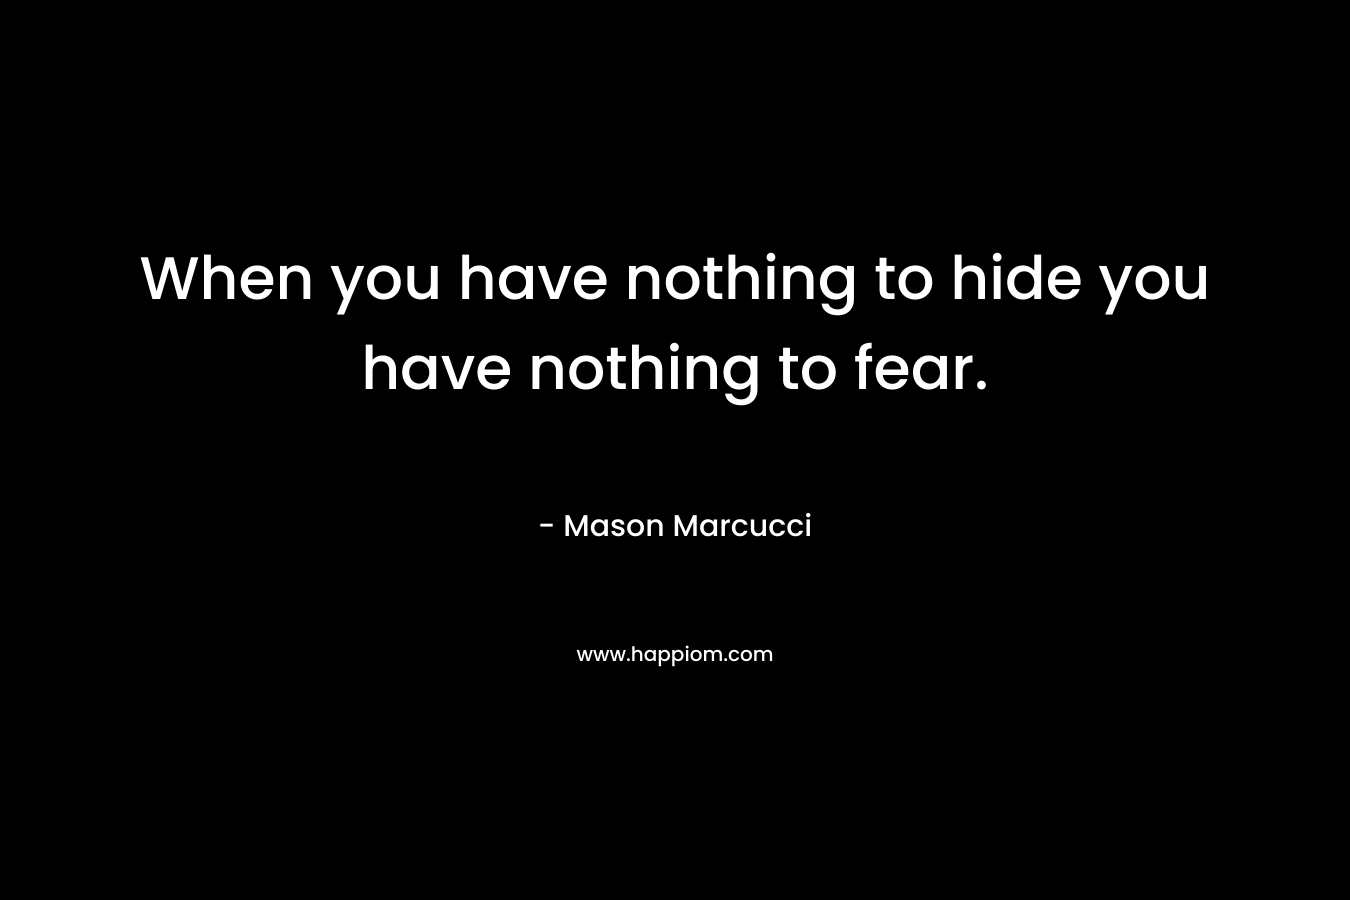 When you have nothing to hide you have nothing to fear. – Mason Marcucci